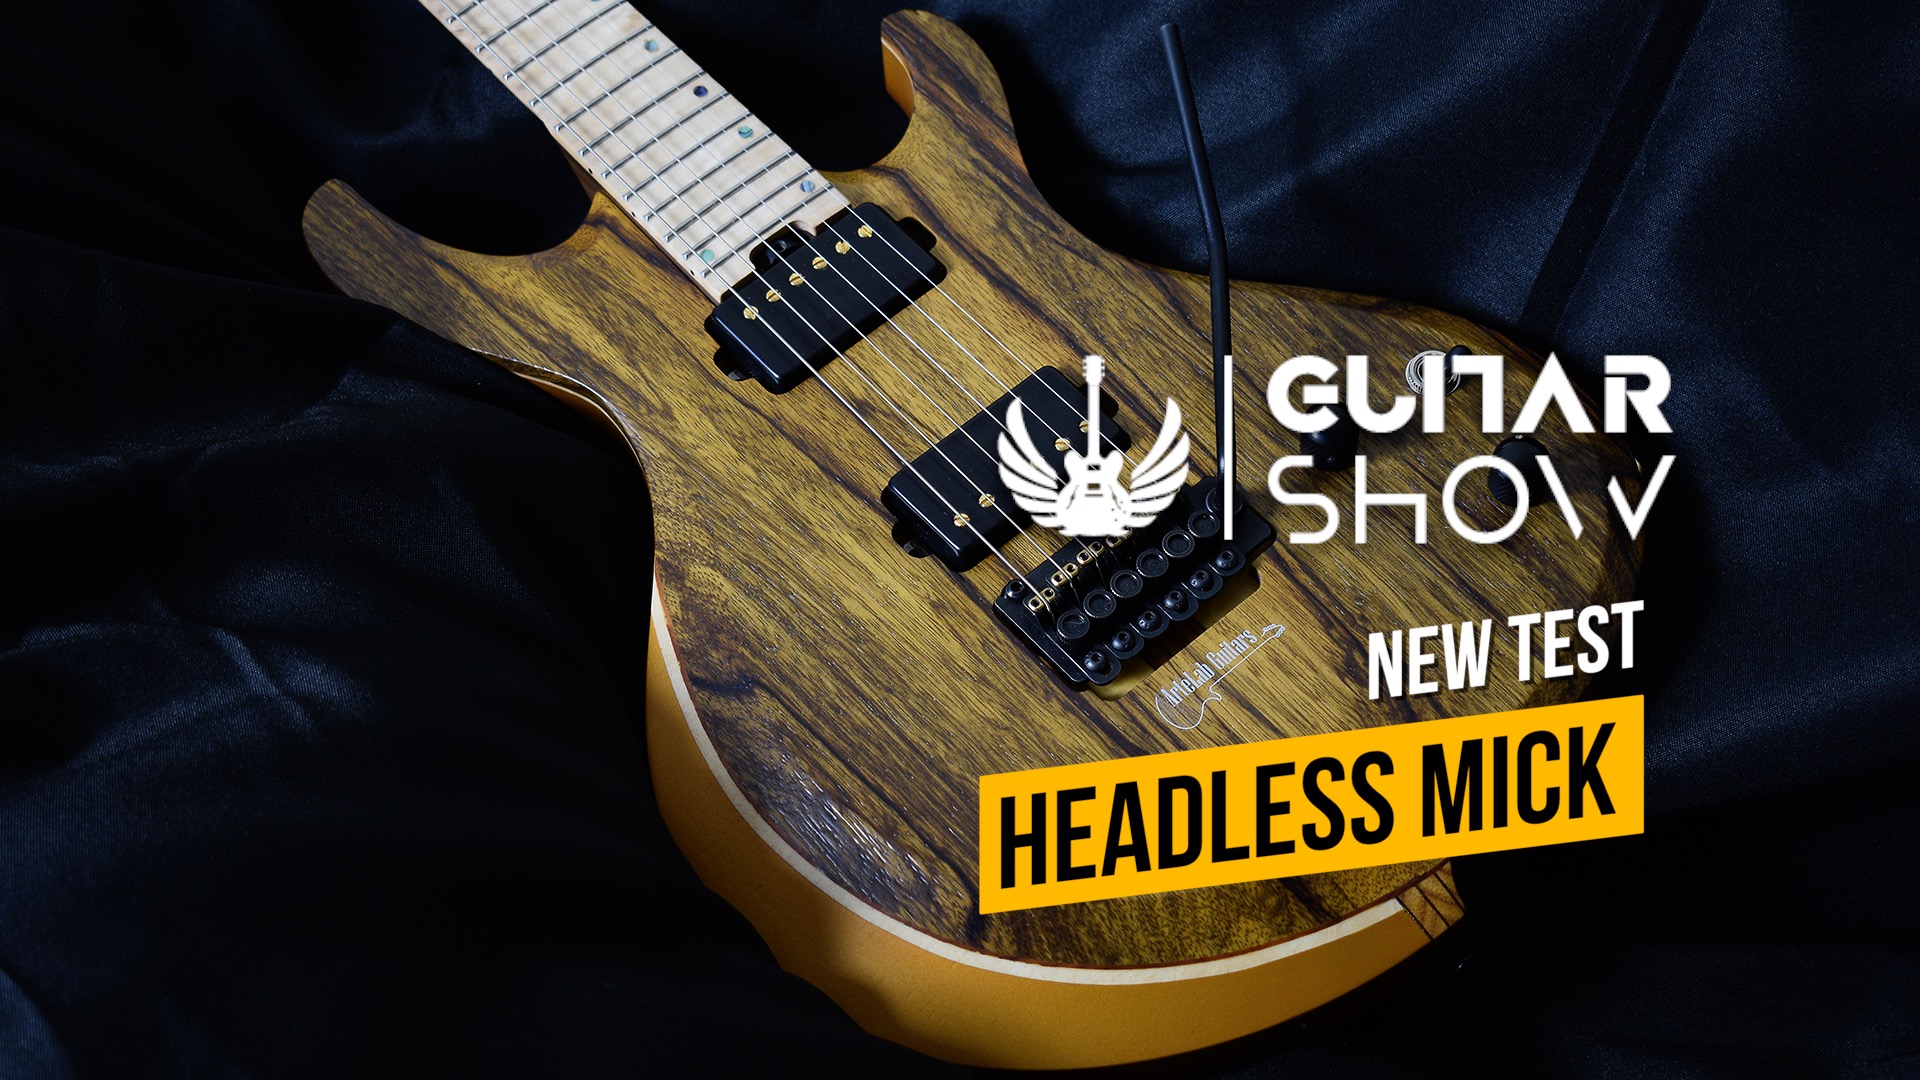 A Made in Italy experience with the Headless MICK model from ArteLab Guitars